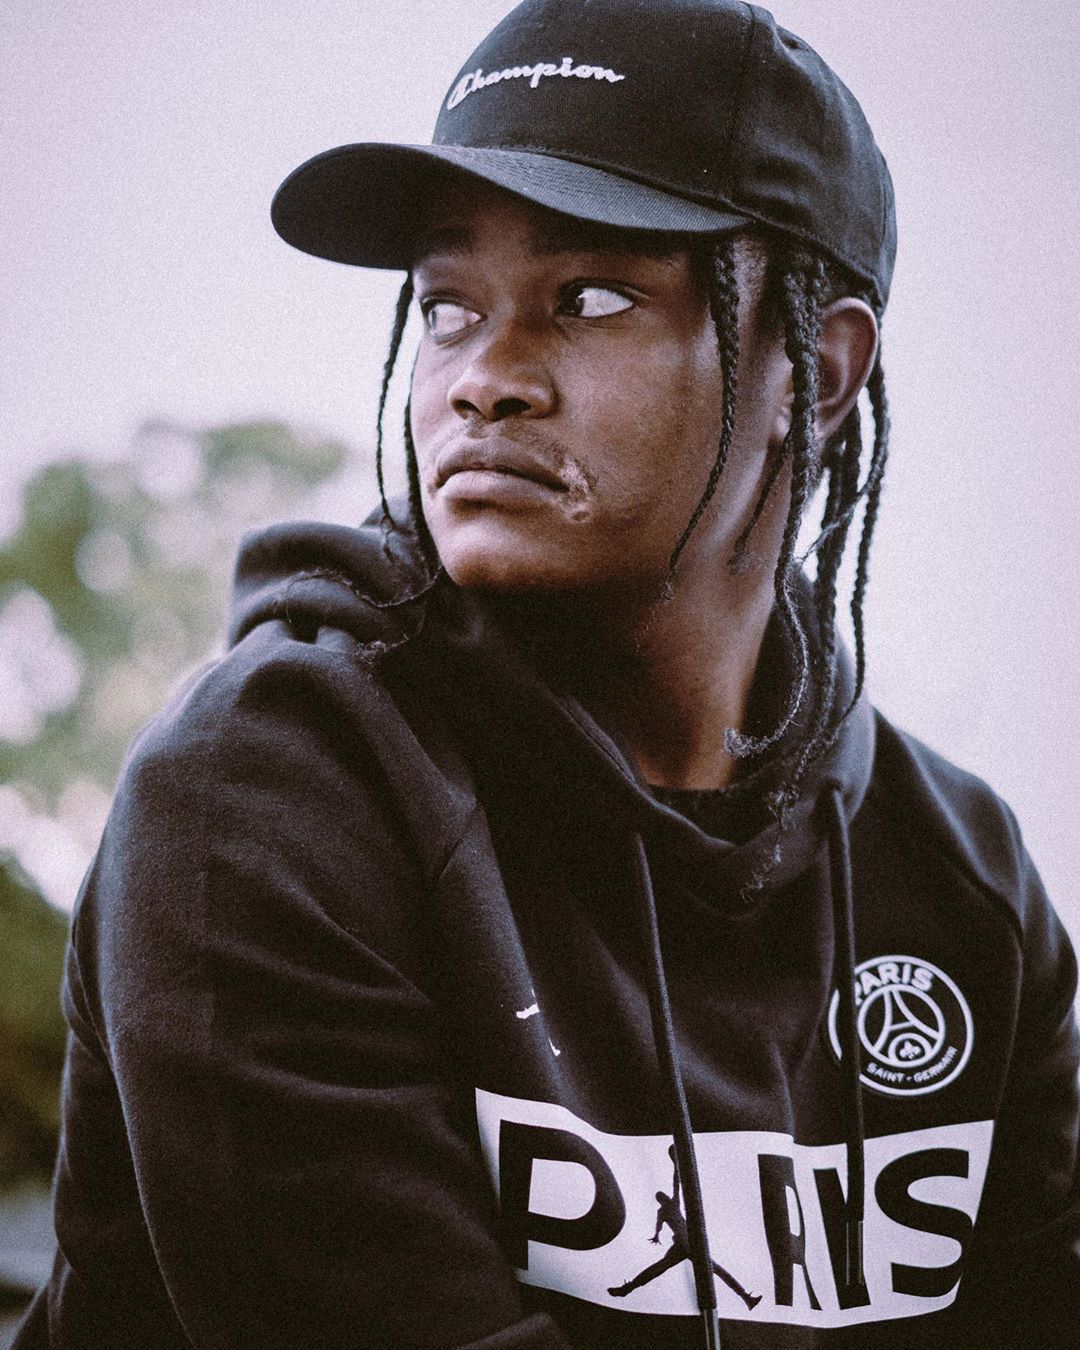 Zoocci Coke Dope is a music producer and musician from South Africa